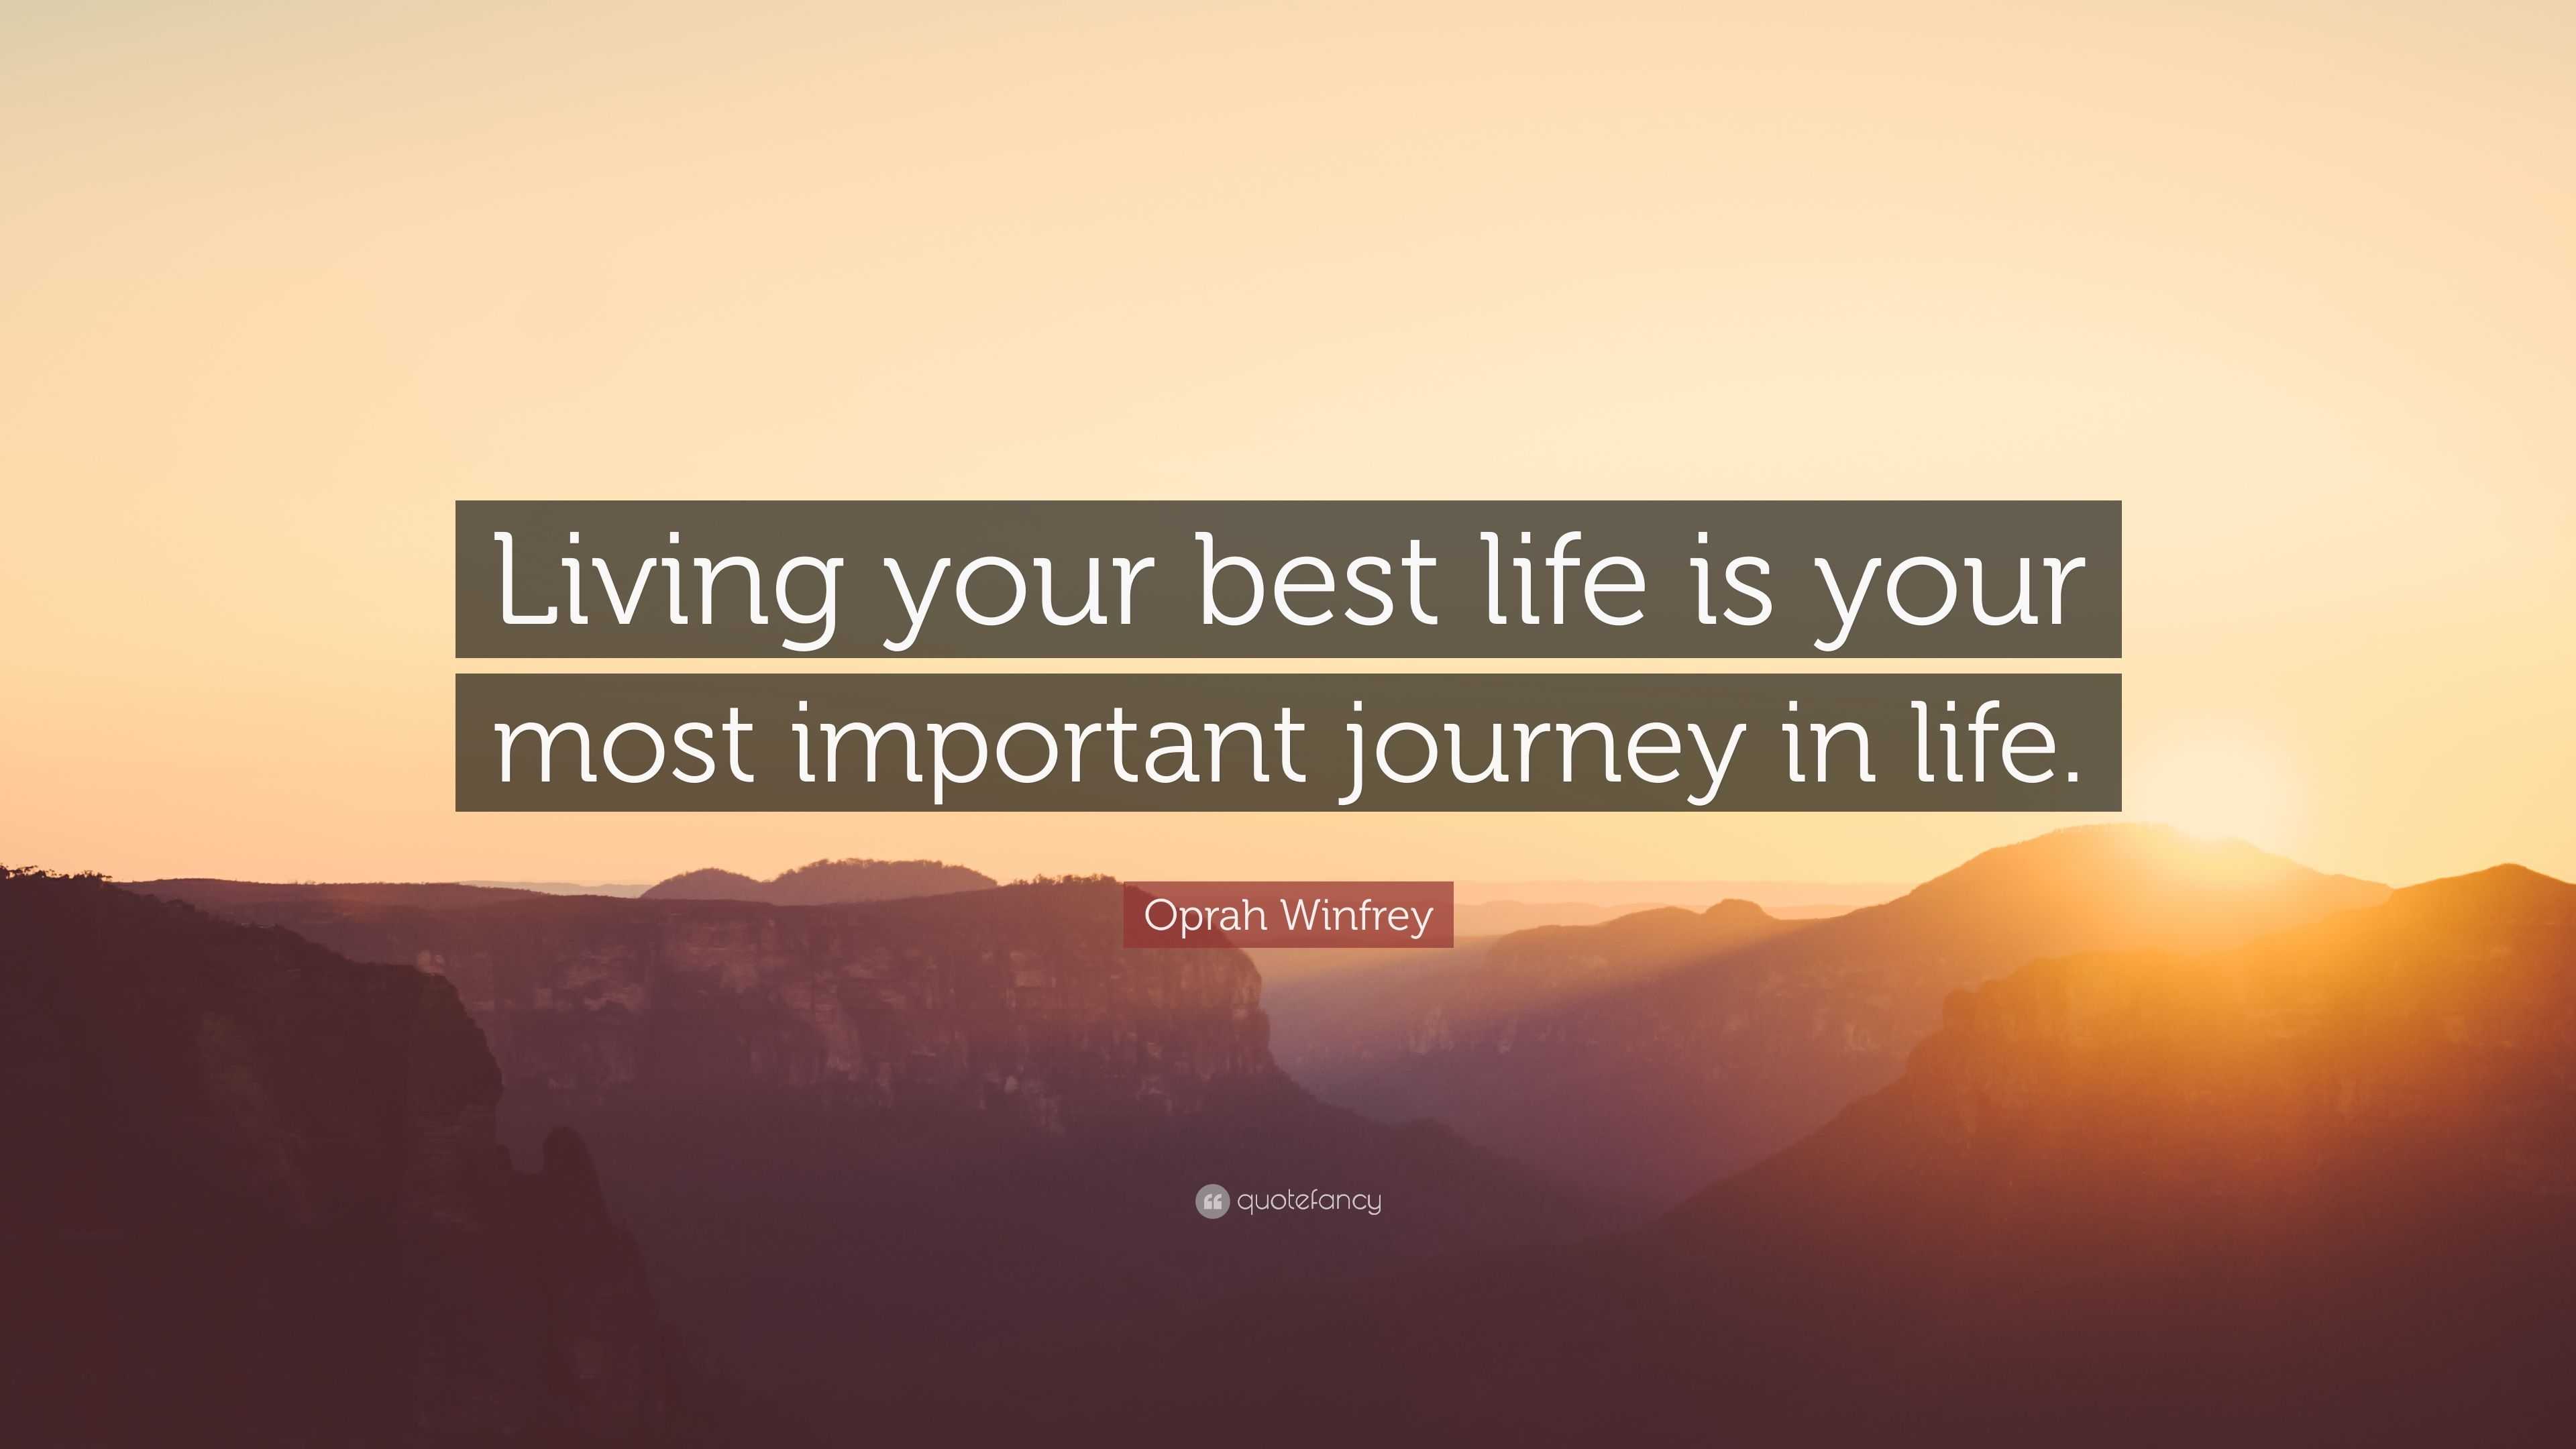 Oprah Winfrey Quote: “Living your best life is your most important ...